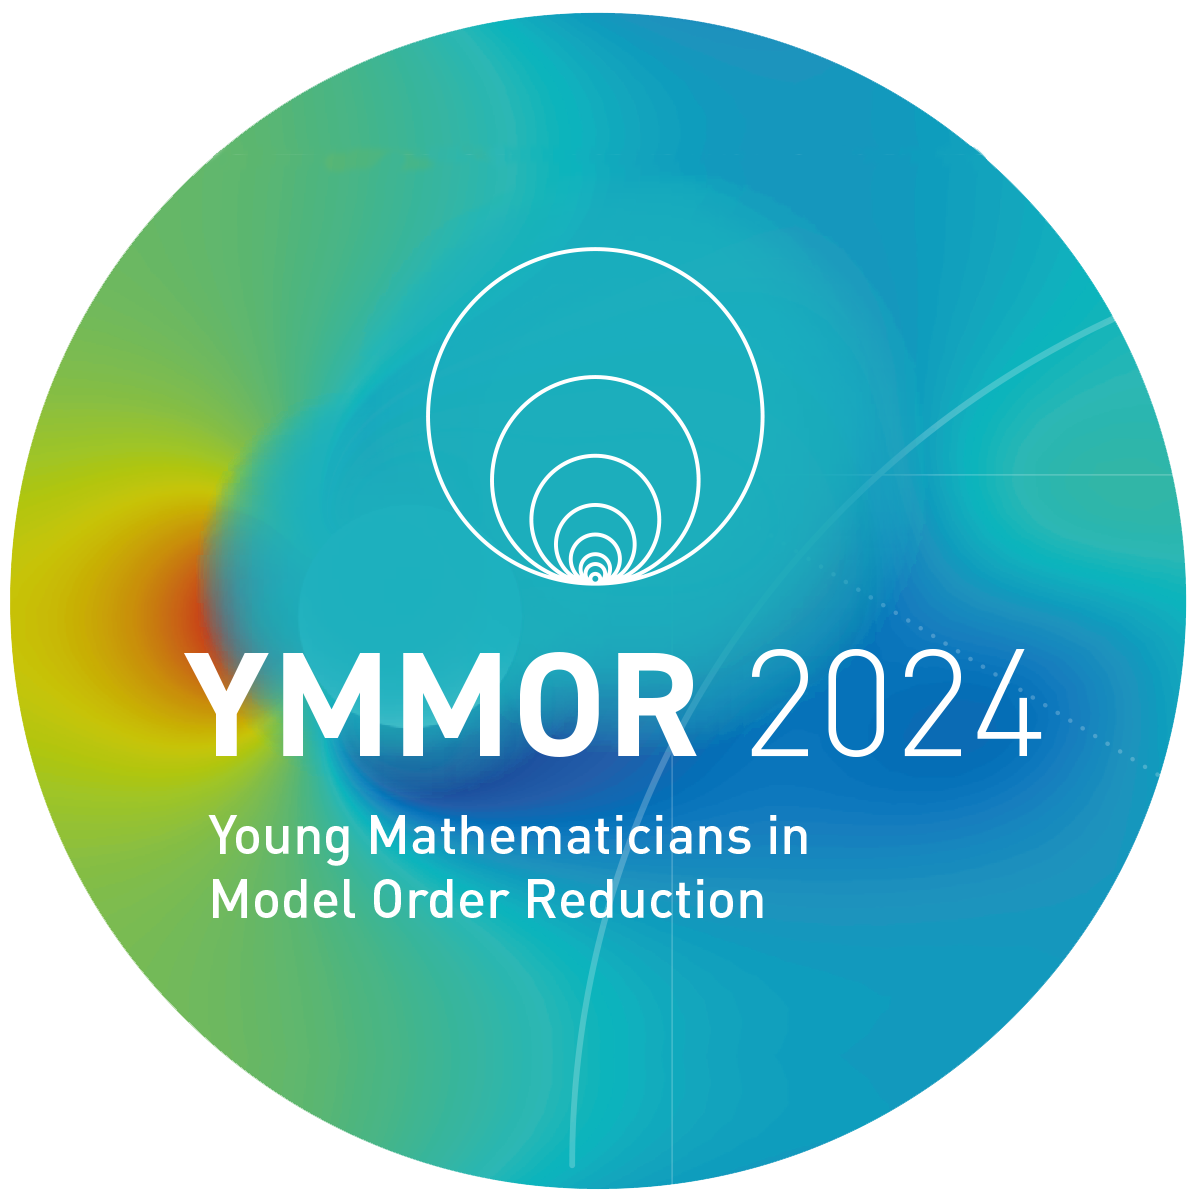 This image shows YMMOR  2024